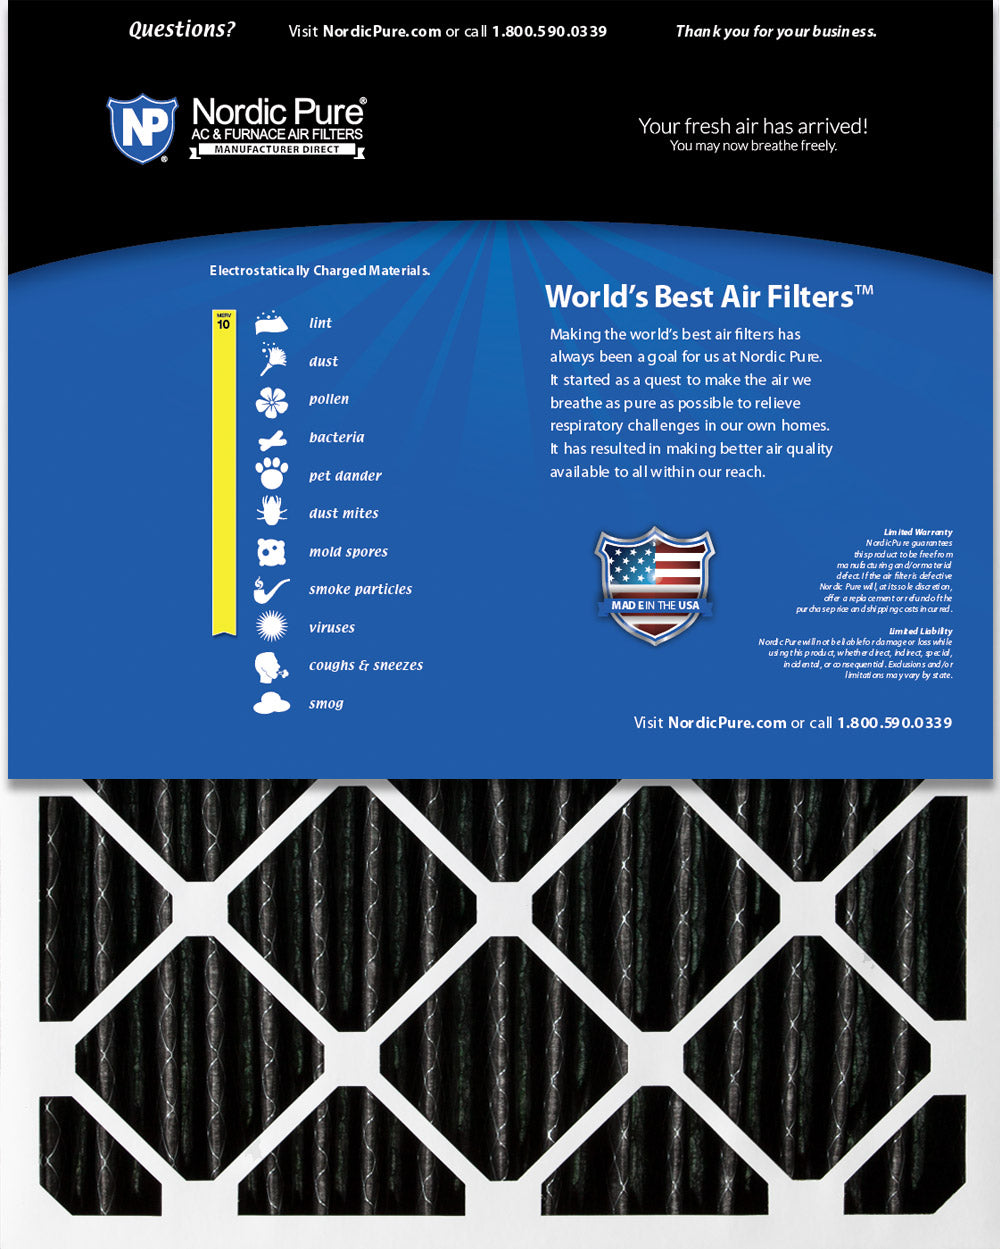 18x24x4 (3 5/8) Furnace Air Filters MERV 10 Pleated Plus Carbon